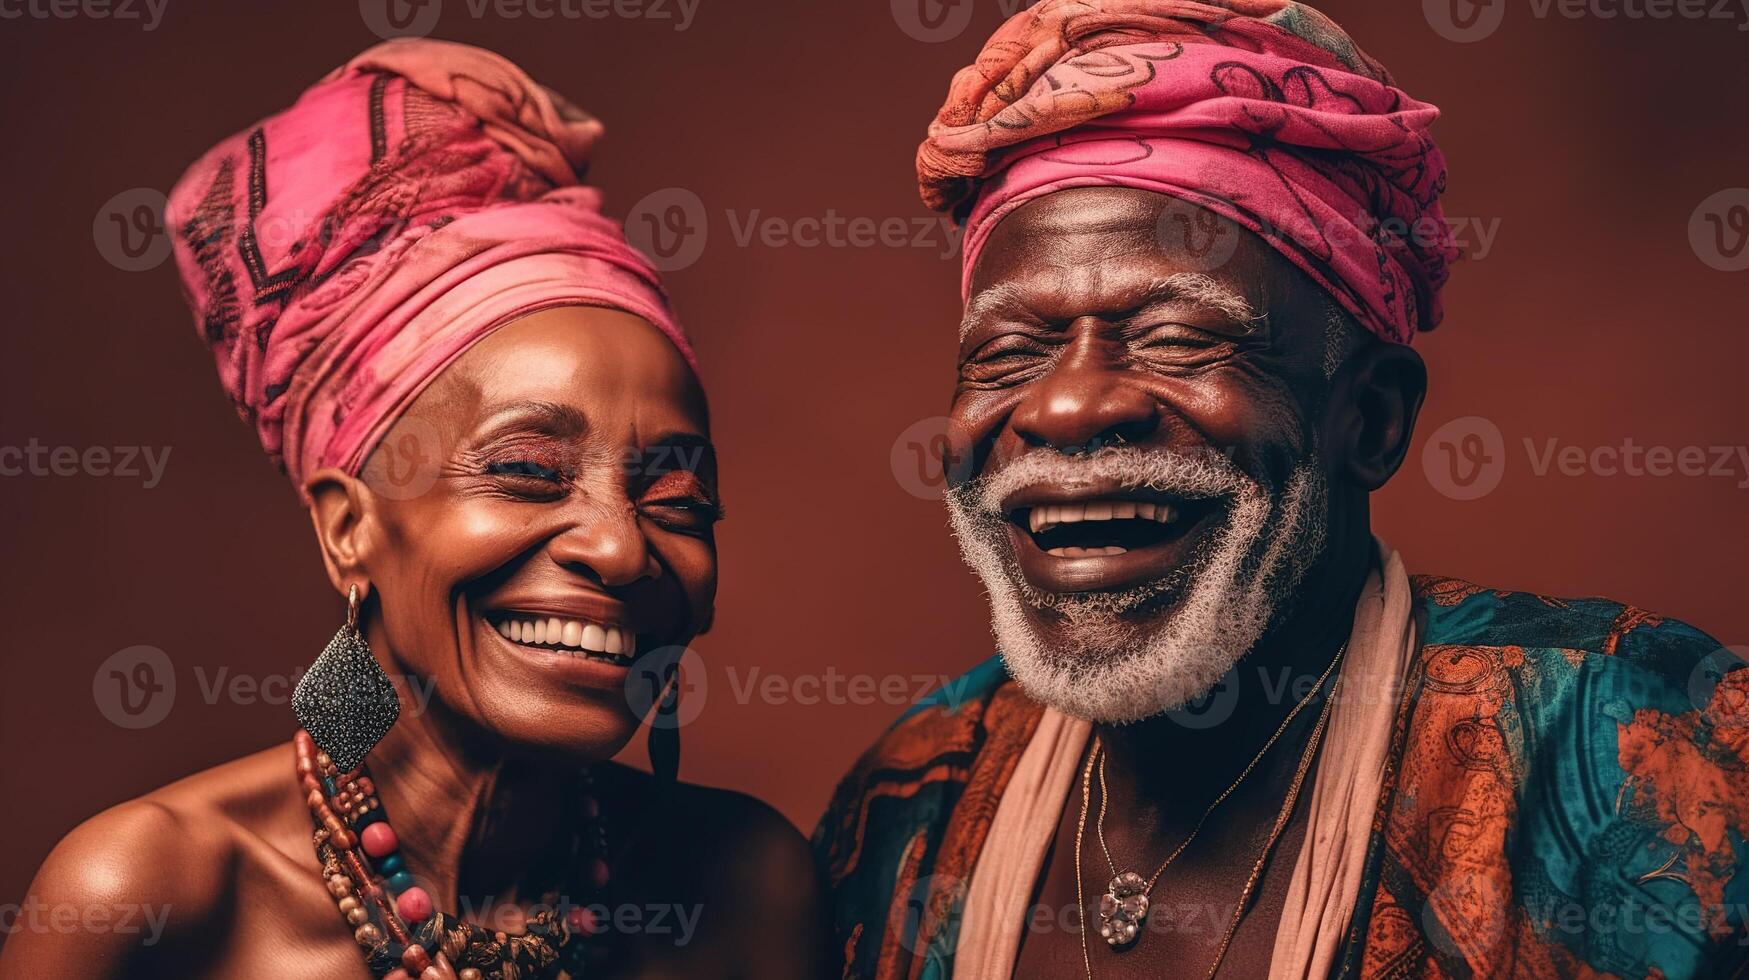 Joyful Elderly Love. African Couple Shares Laughter and Happiness. photo